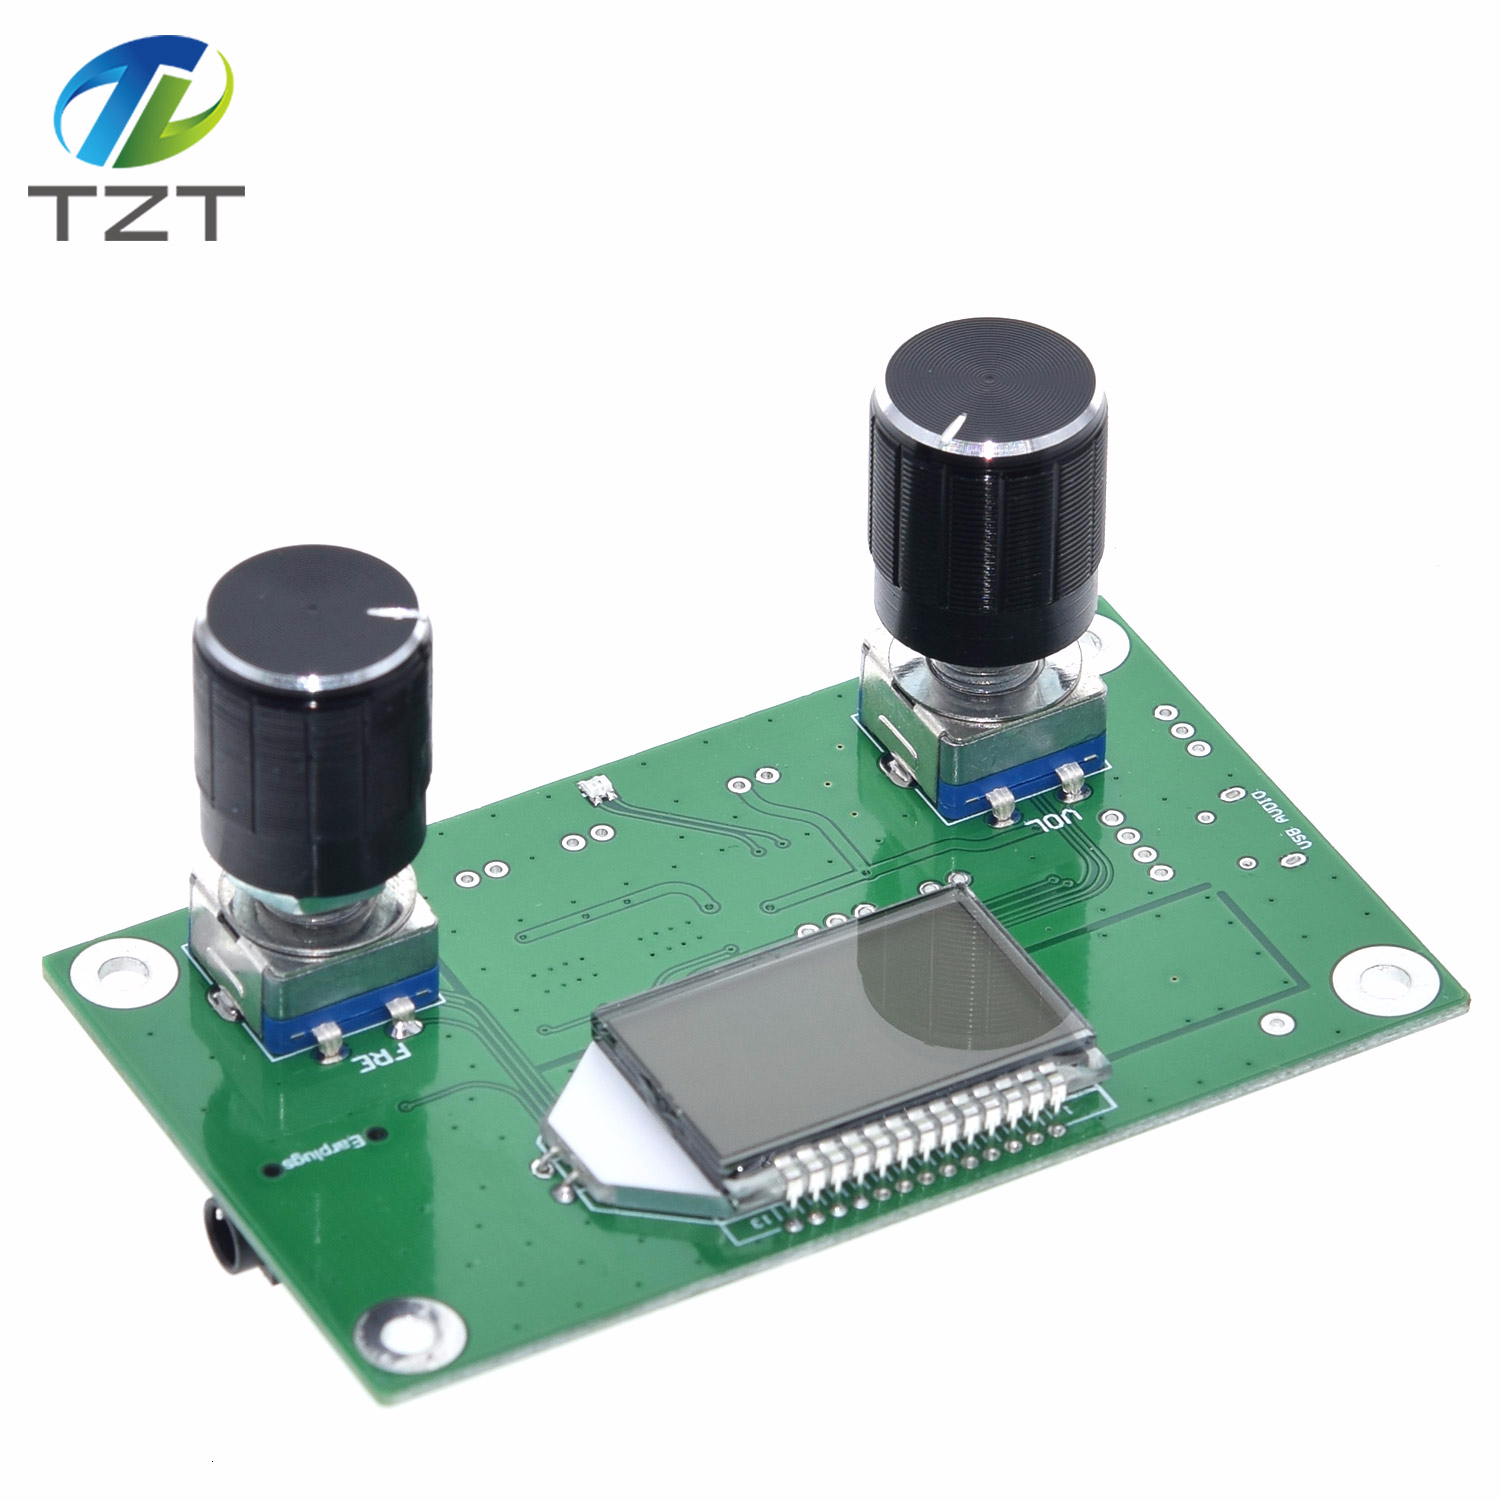 TZT FM Radio Receiver Module Frequency Modulation Stereo Receiving PCB Circuit Board With Silencing LCD Display 3-5V LCD Module